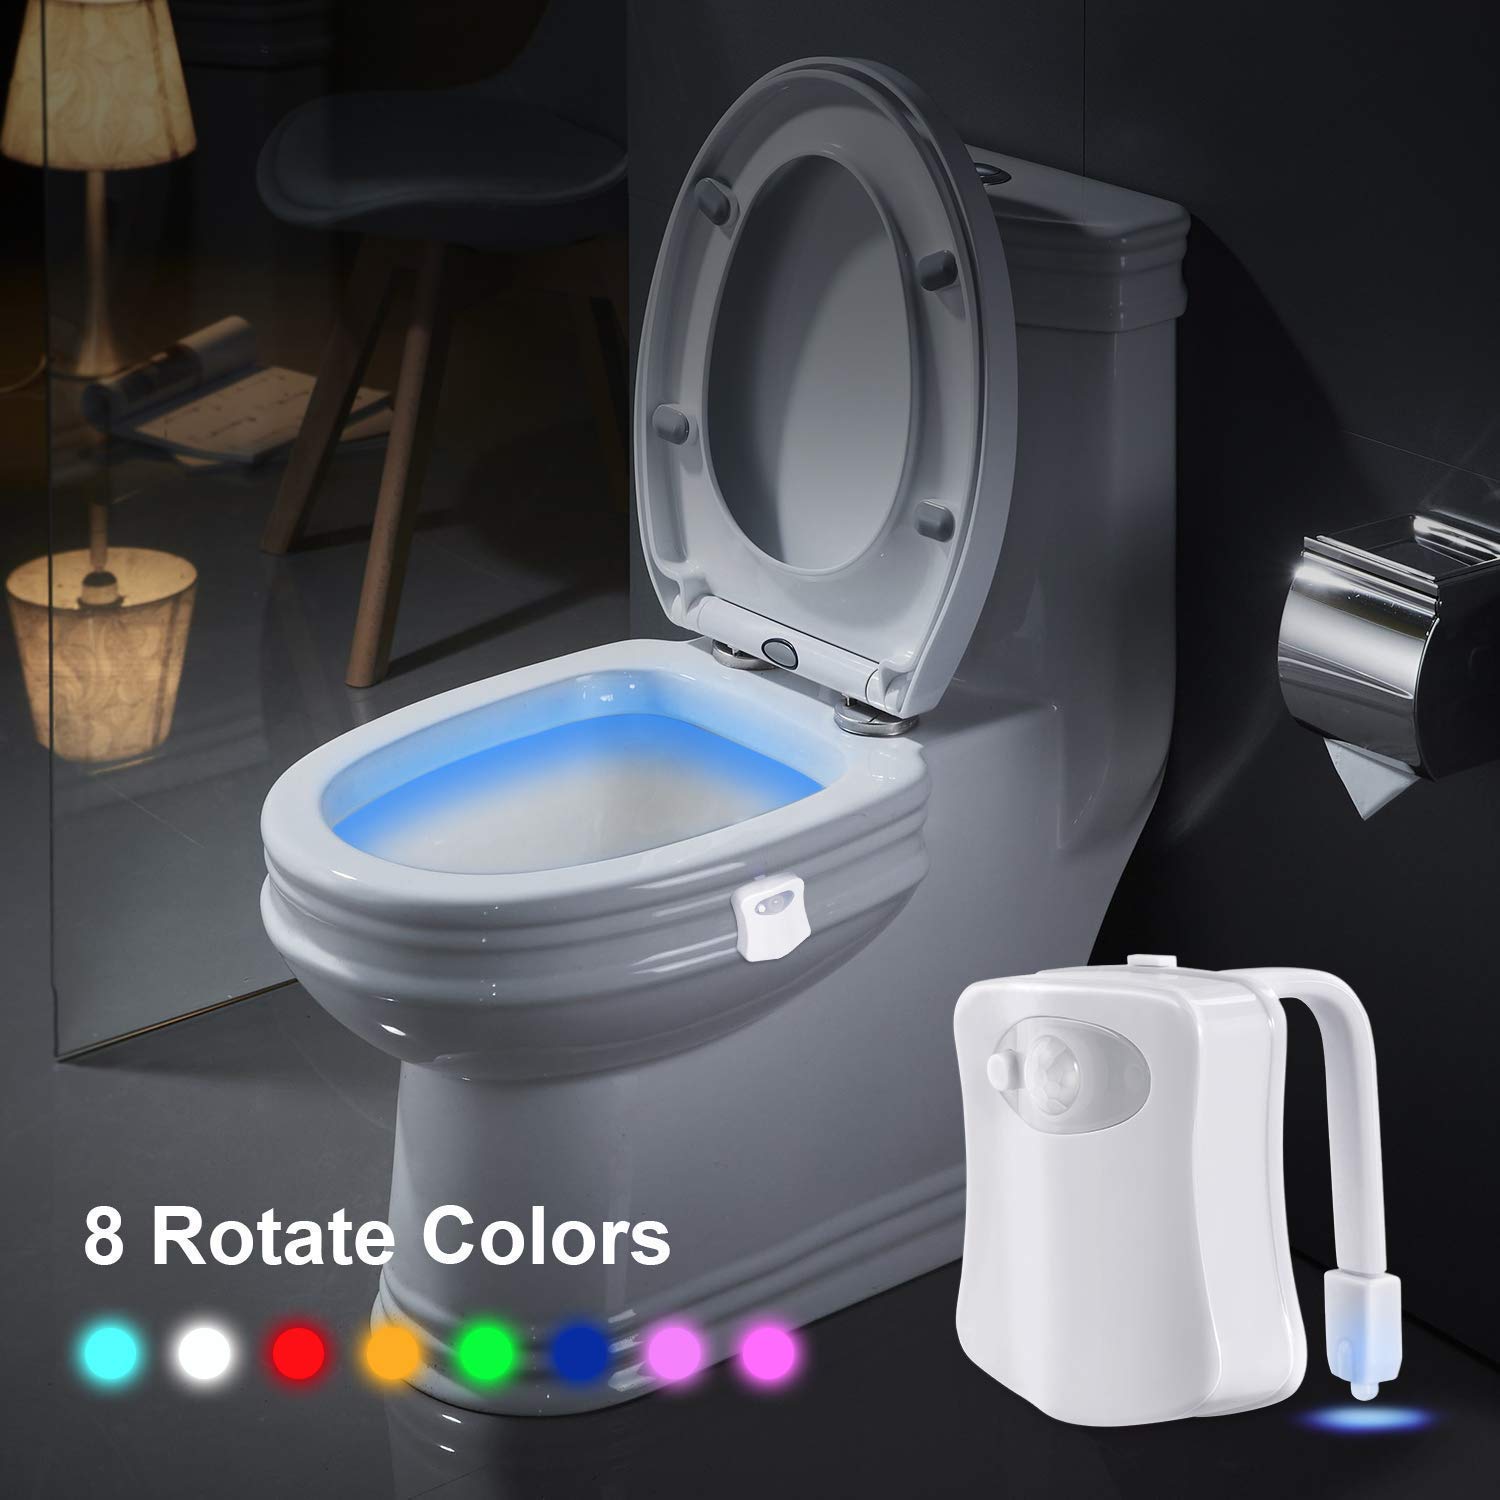 Gliving Toilet Night Light 8-Color Motion Sensor LED Night Lights Activated Detection Toilet Bowl LED Light for Bathroom Washroom Light Detection Fits Any